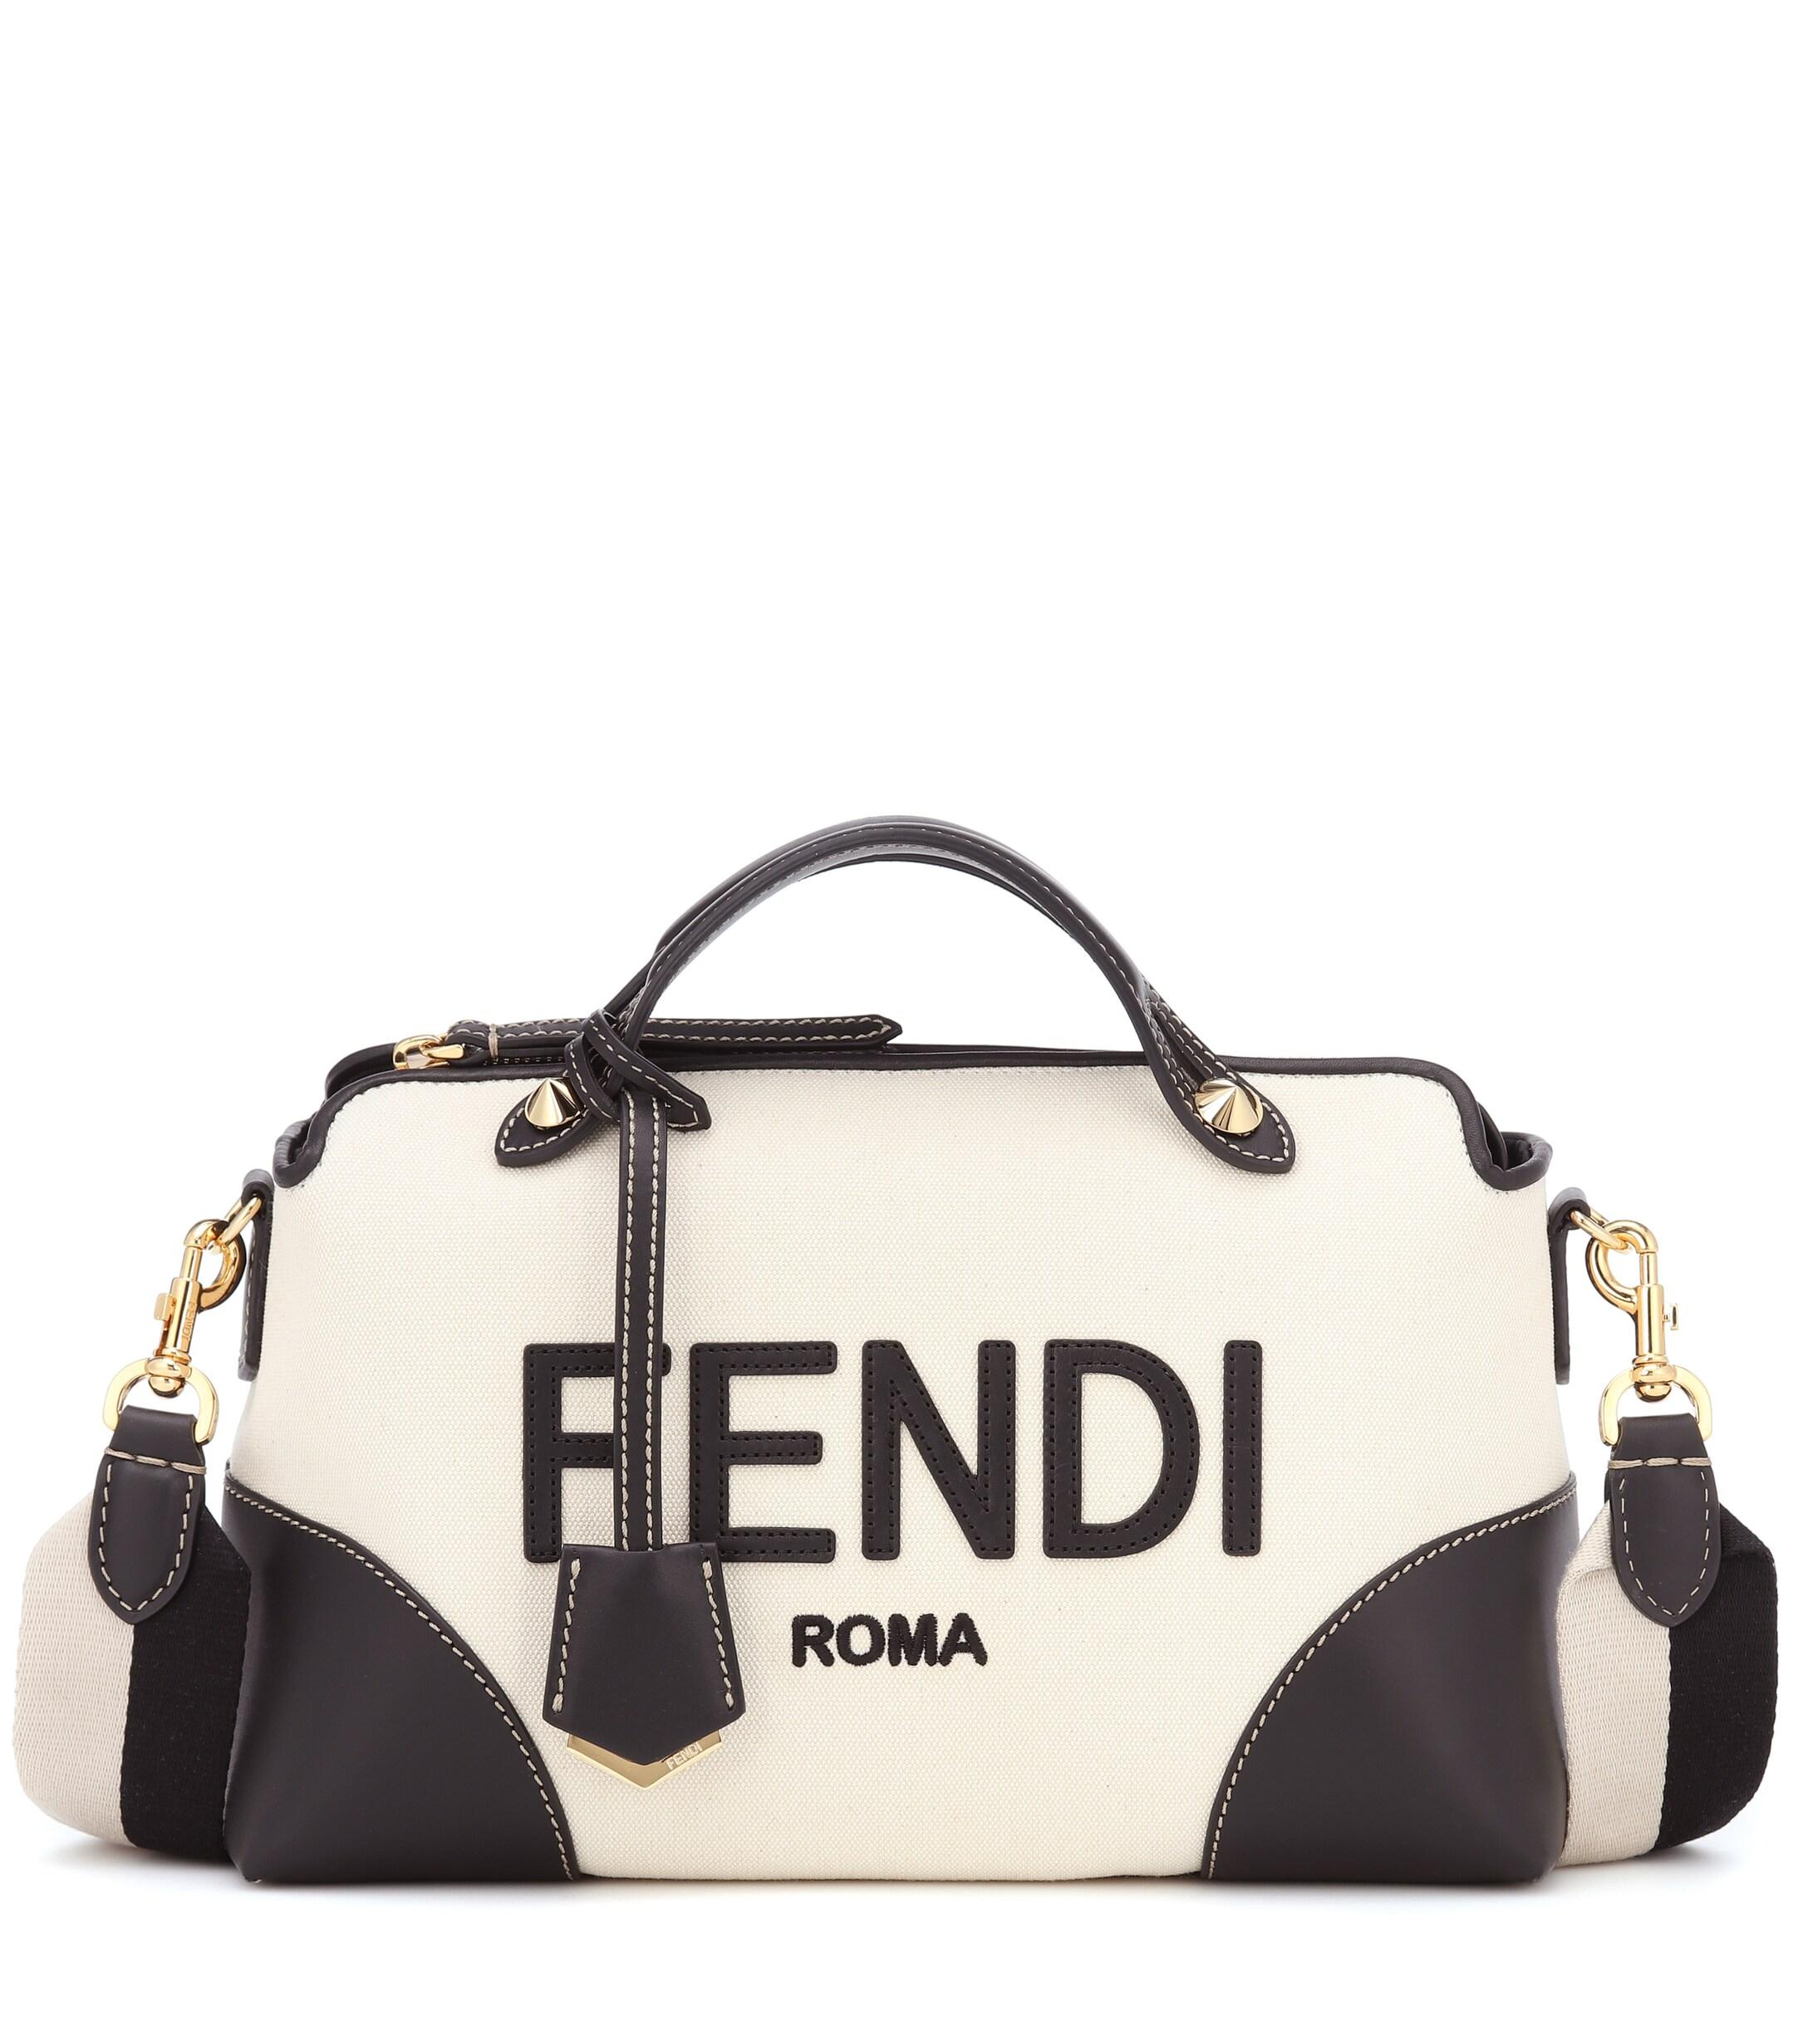 Fendi By The Way Medium Leather Shoulder Bag in White - Lyst